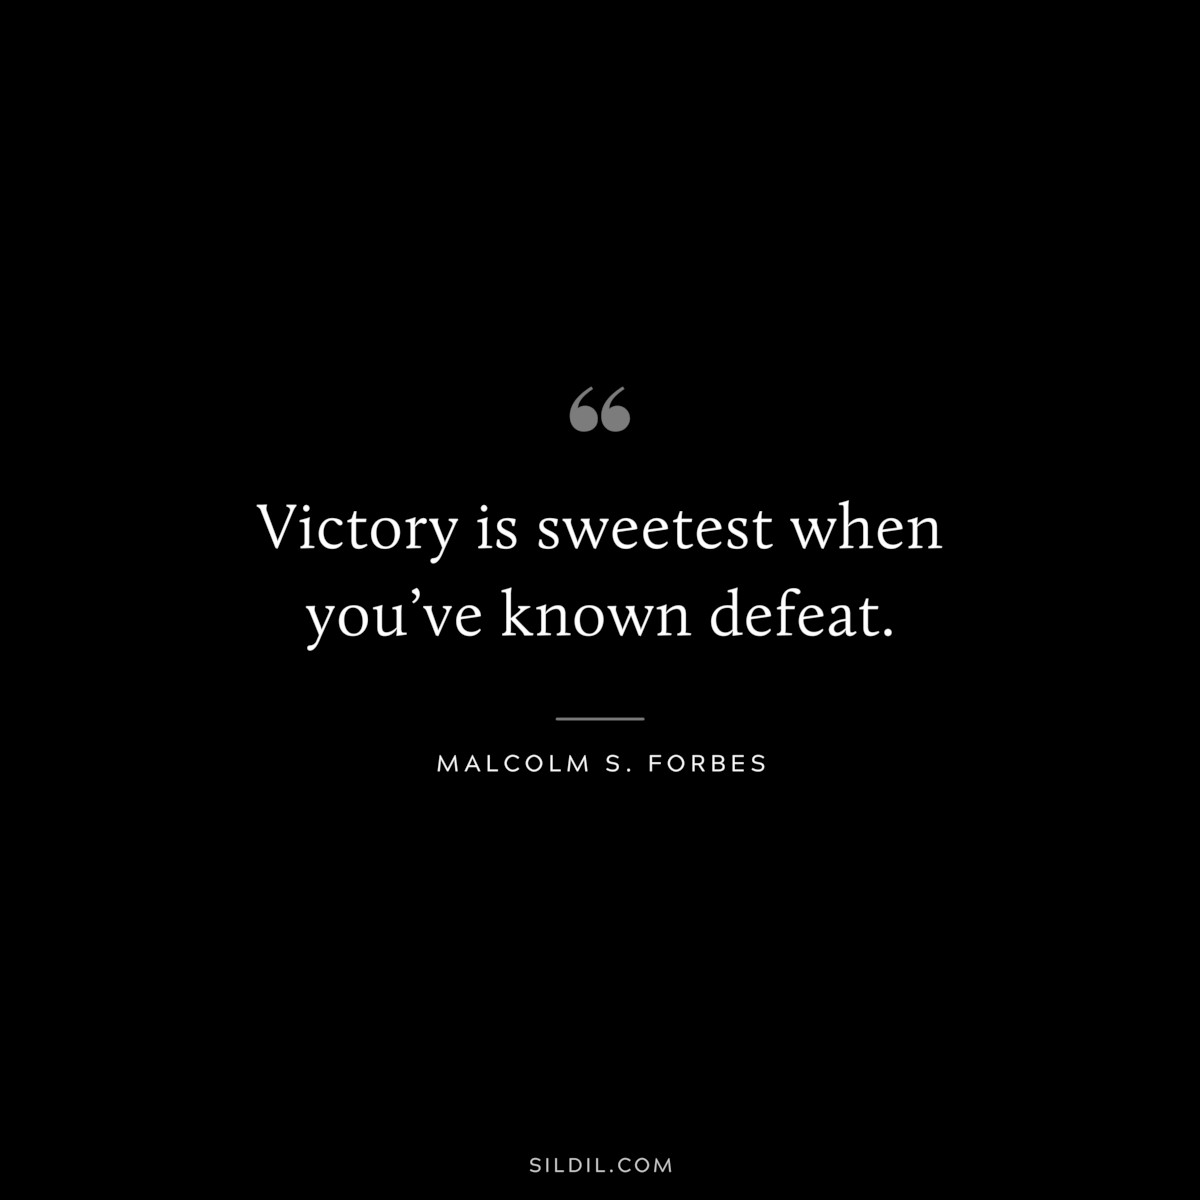 Victory is sweetest when you’ve known defeat. ― Malcolm S. Forbes